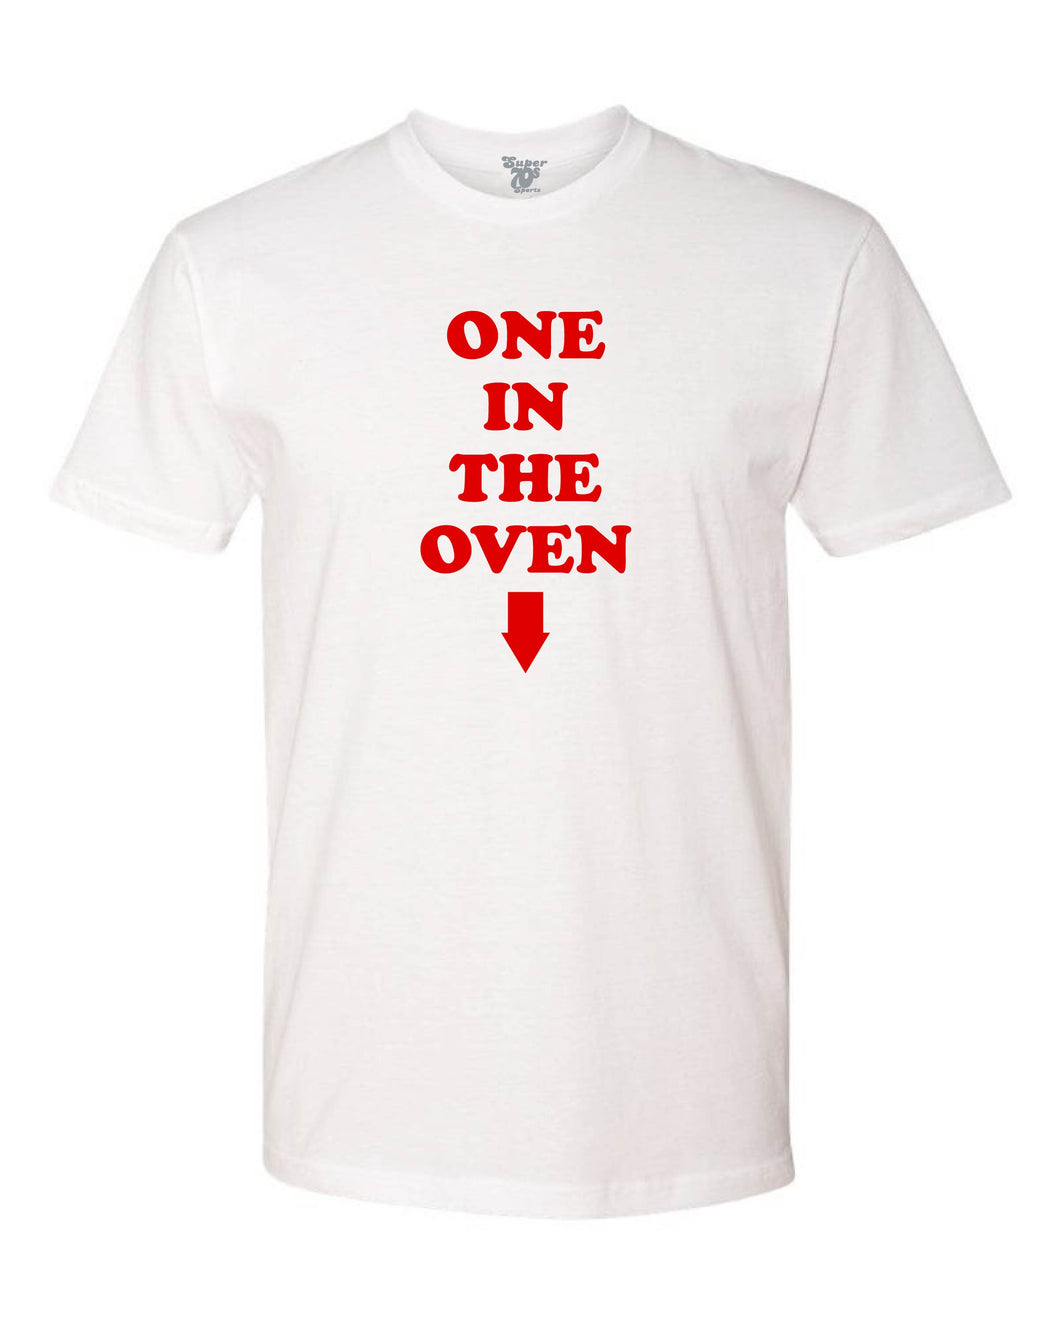 One in the Oven Tee